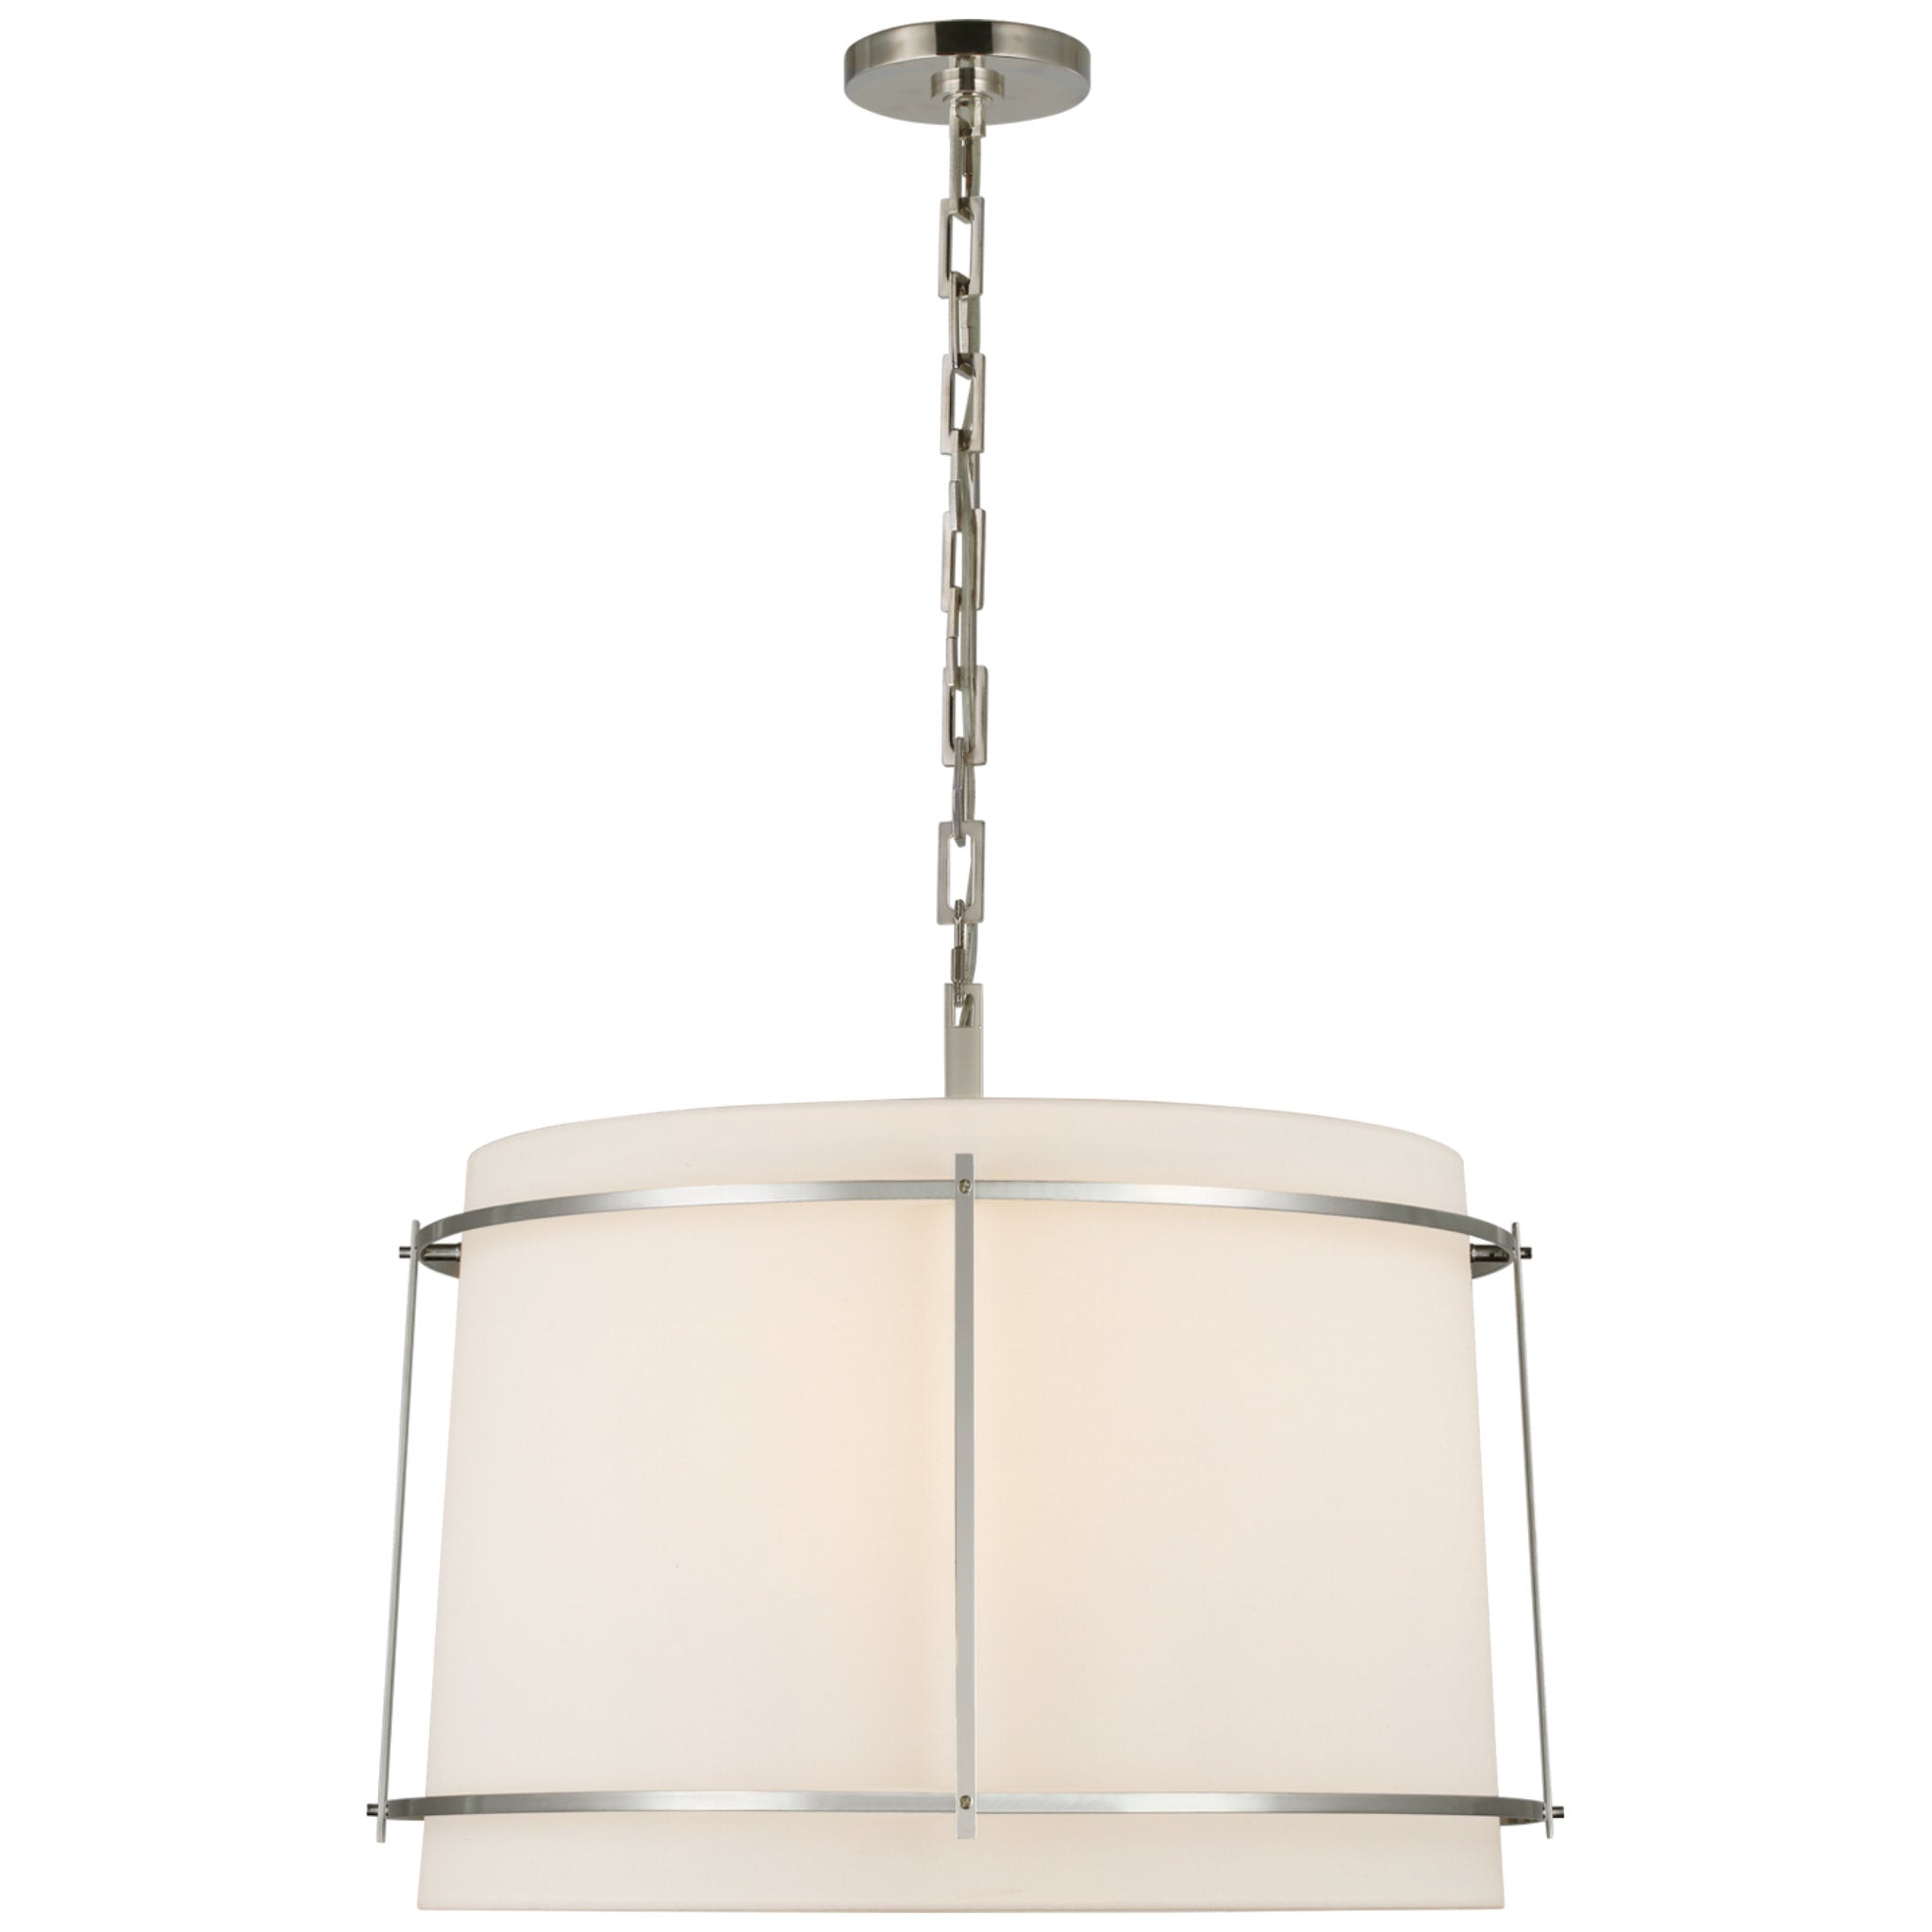 Carrier and Company Callaway Large Hanging Shade in Polished Nickel with Linen Shade and Frosted Acrylic Diffuser